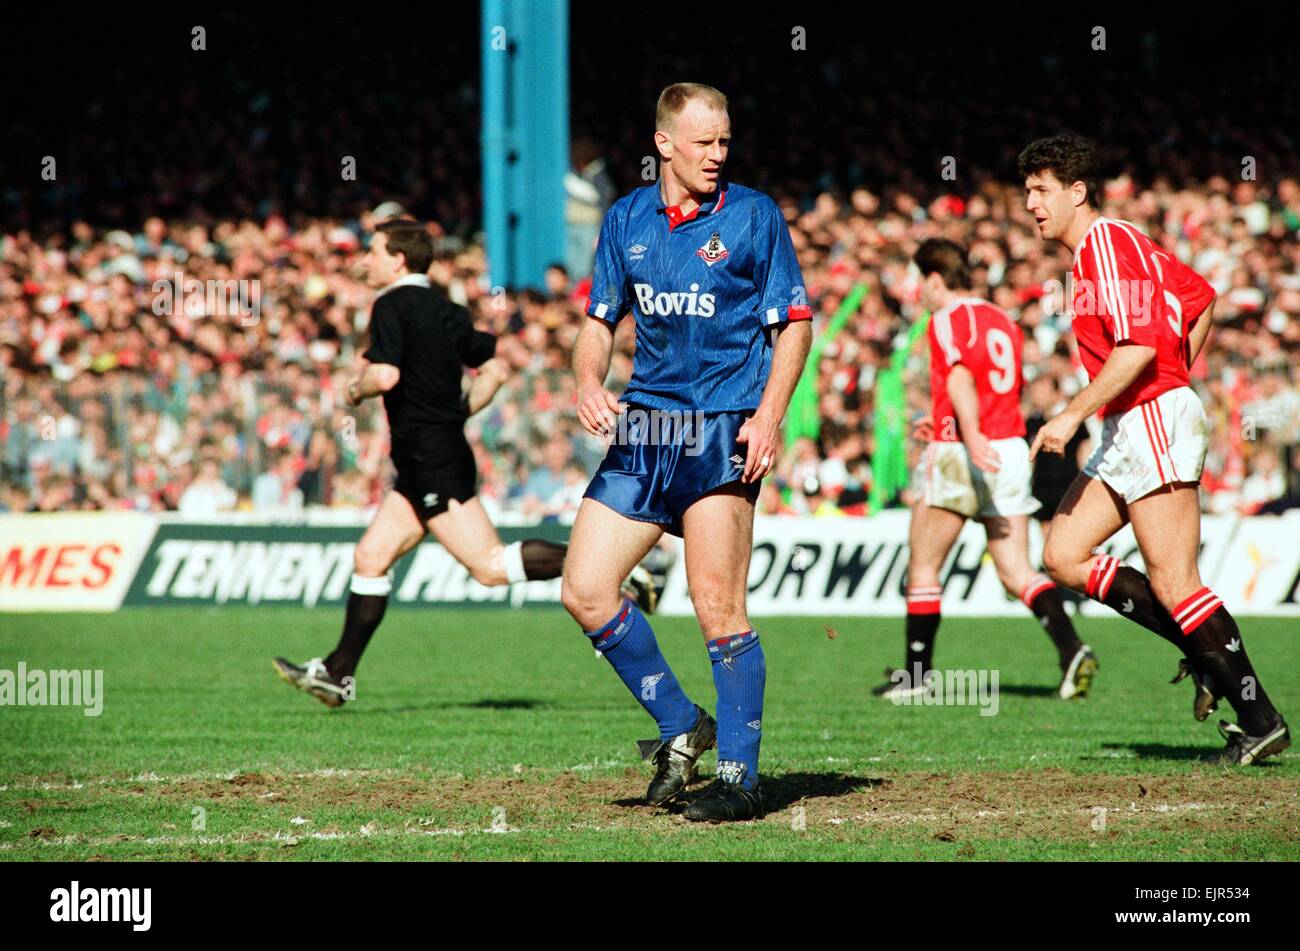 Andy Ritchie. FA-Cup. Manchester United 3 V Oldham Athletic 3. 8. April 1990 Stockfoto